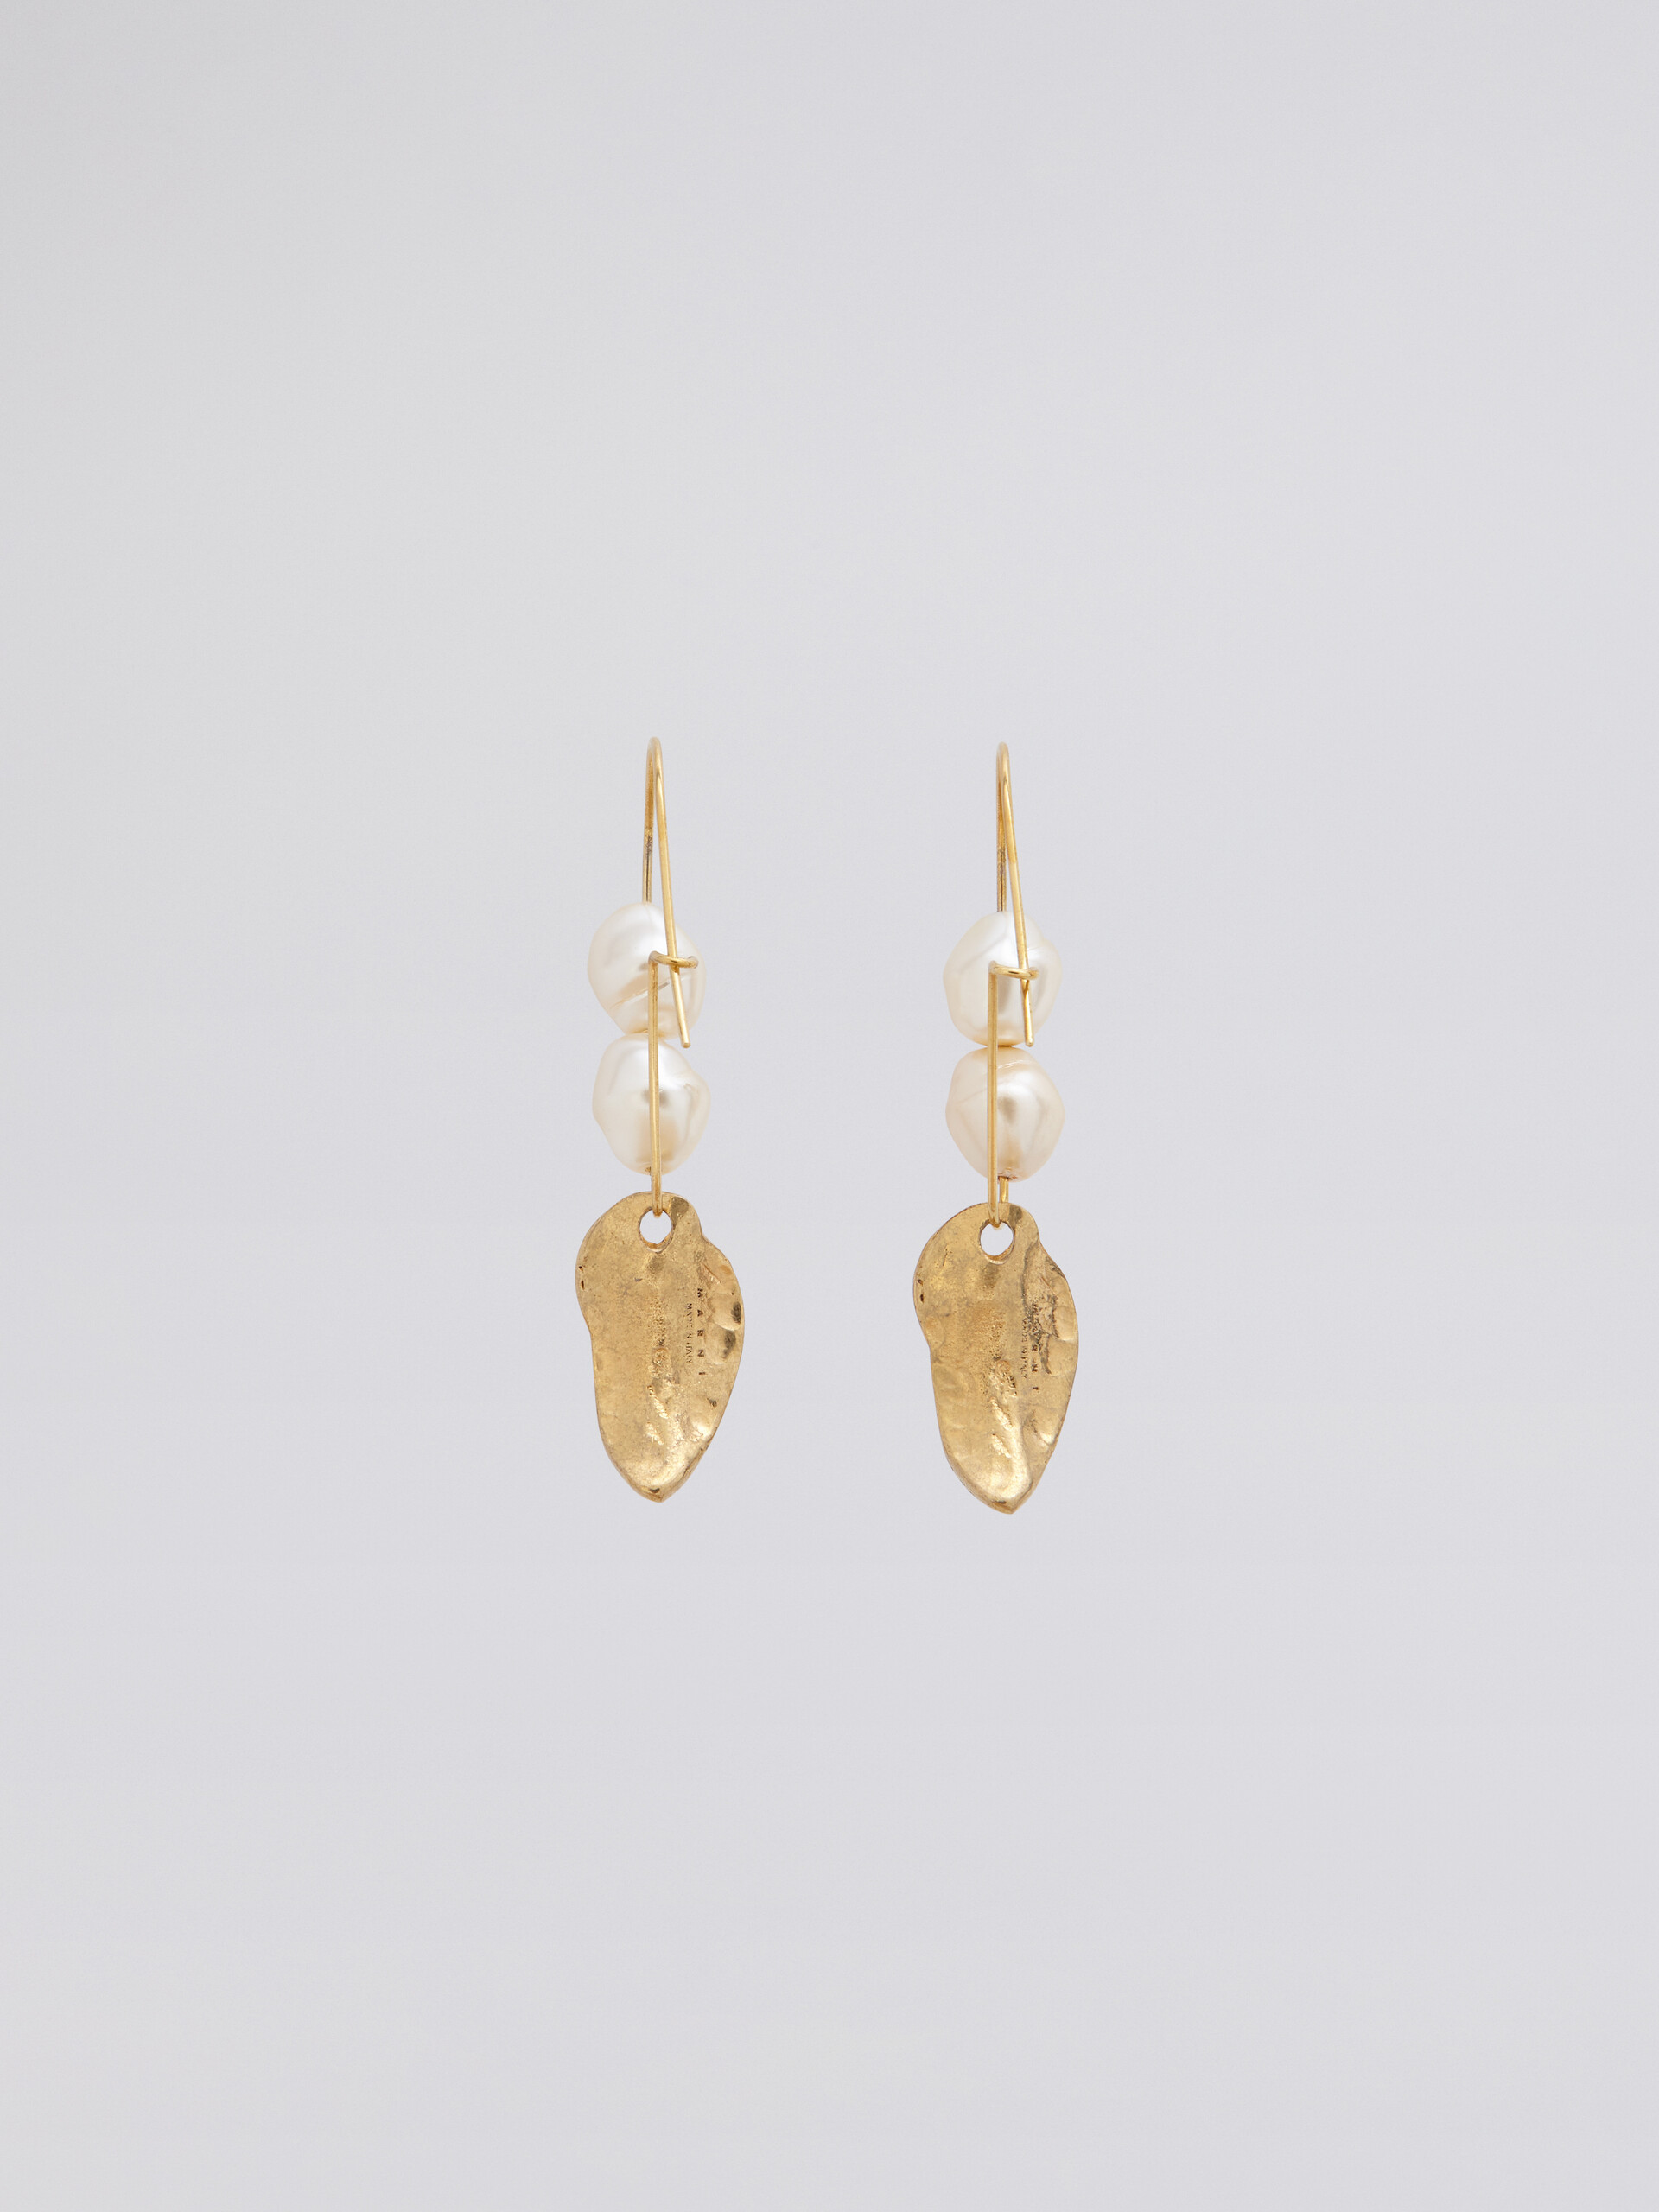 NATURE leverback earrings in gold-tone metal with pearls and leaf - Earrings - Image 2